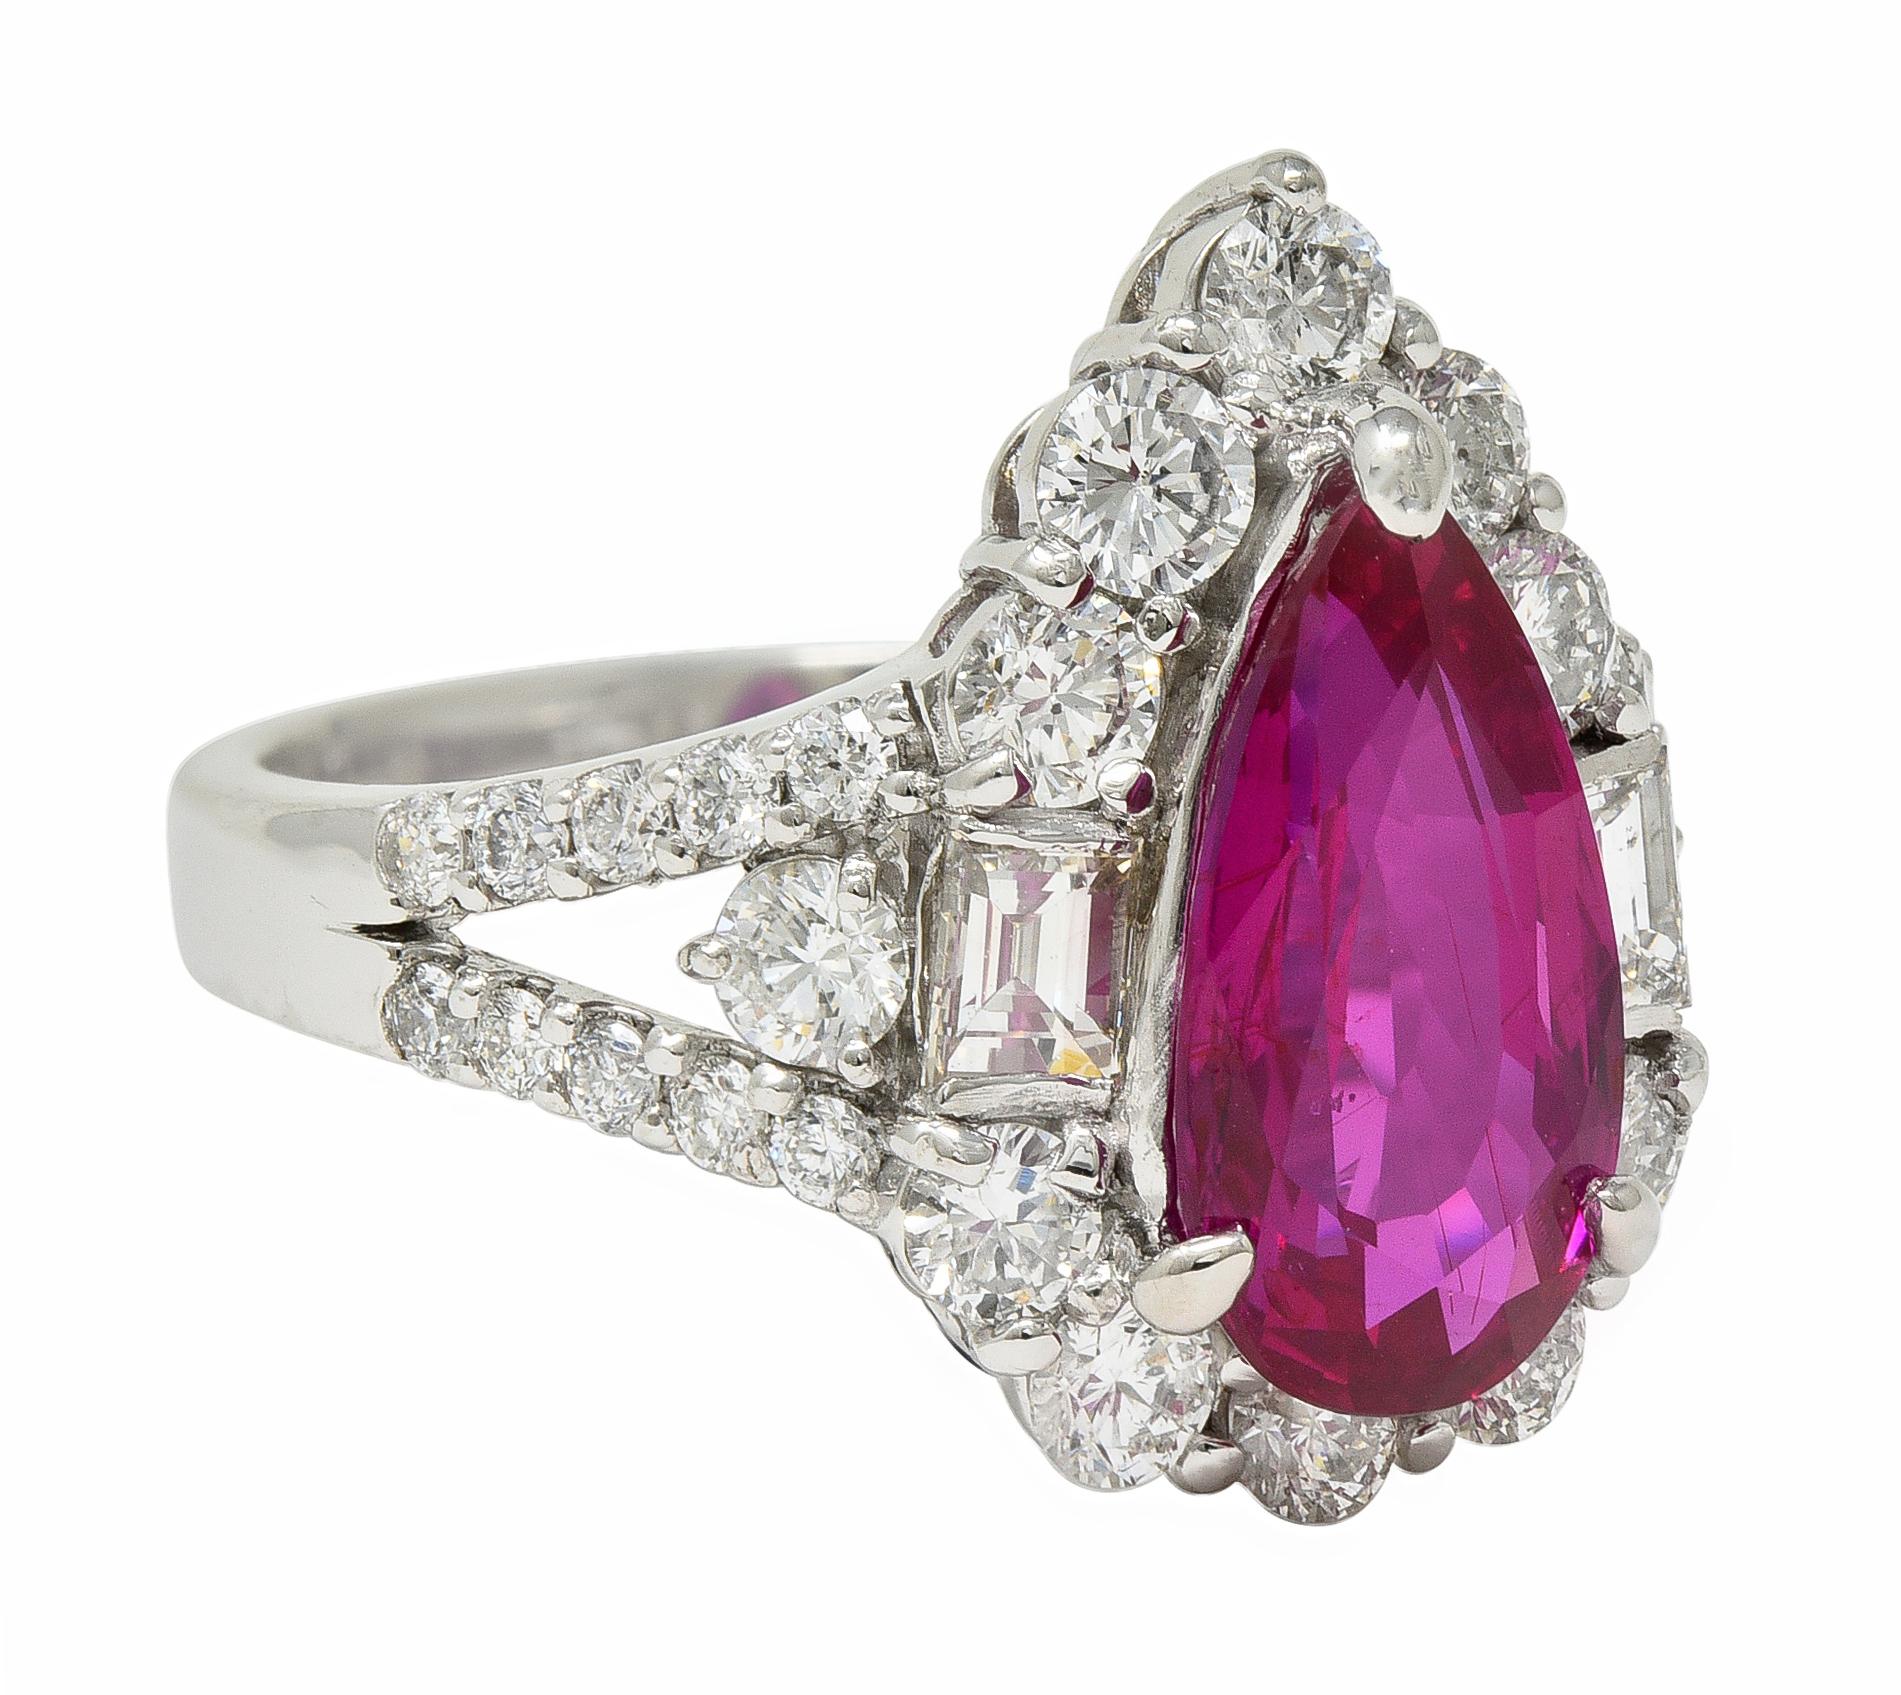 Centering a pear cut ruby weighing 3.34 carats - transparent pinkish red in color
Natural Mozambique in origin with no indications of heat treatment 
Prong set with a halo surround of round brilliant and baguette cut diamonds
Flanked by split